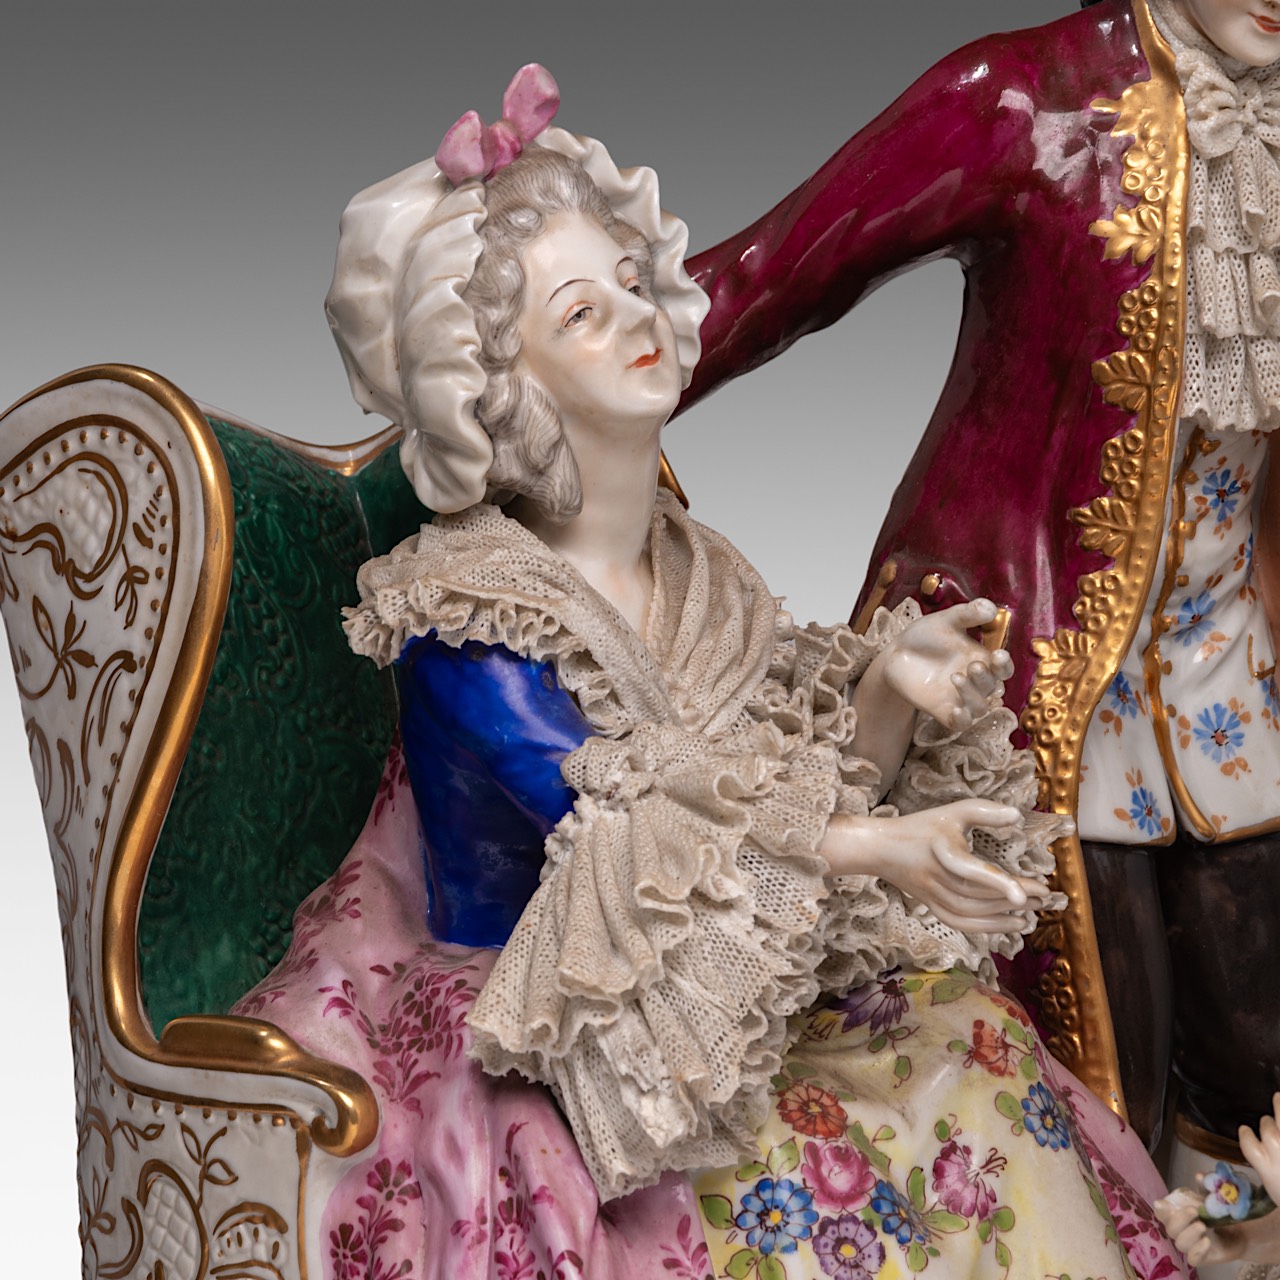 A large Saxony polychrome porcelain group depicting a gallant scene in a Rococo setting, H 40 - W 55 - Image 8 of 15